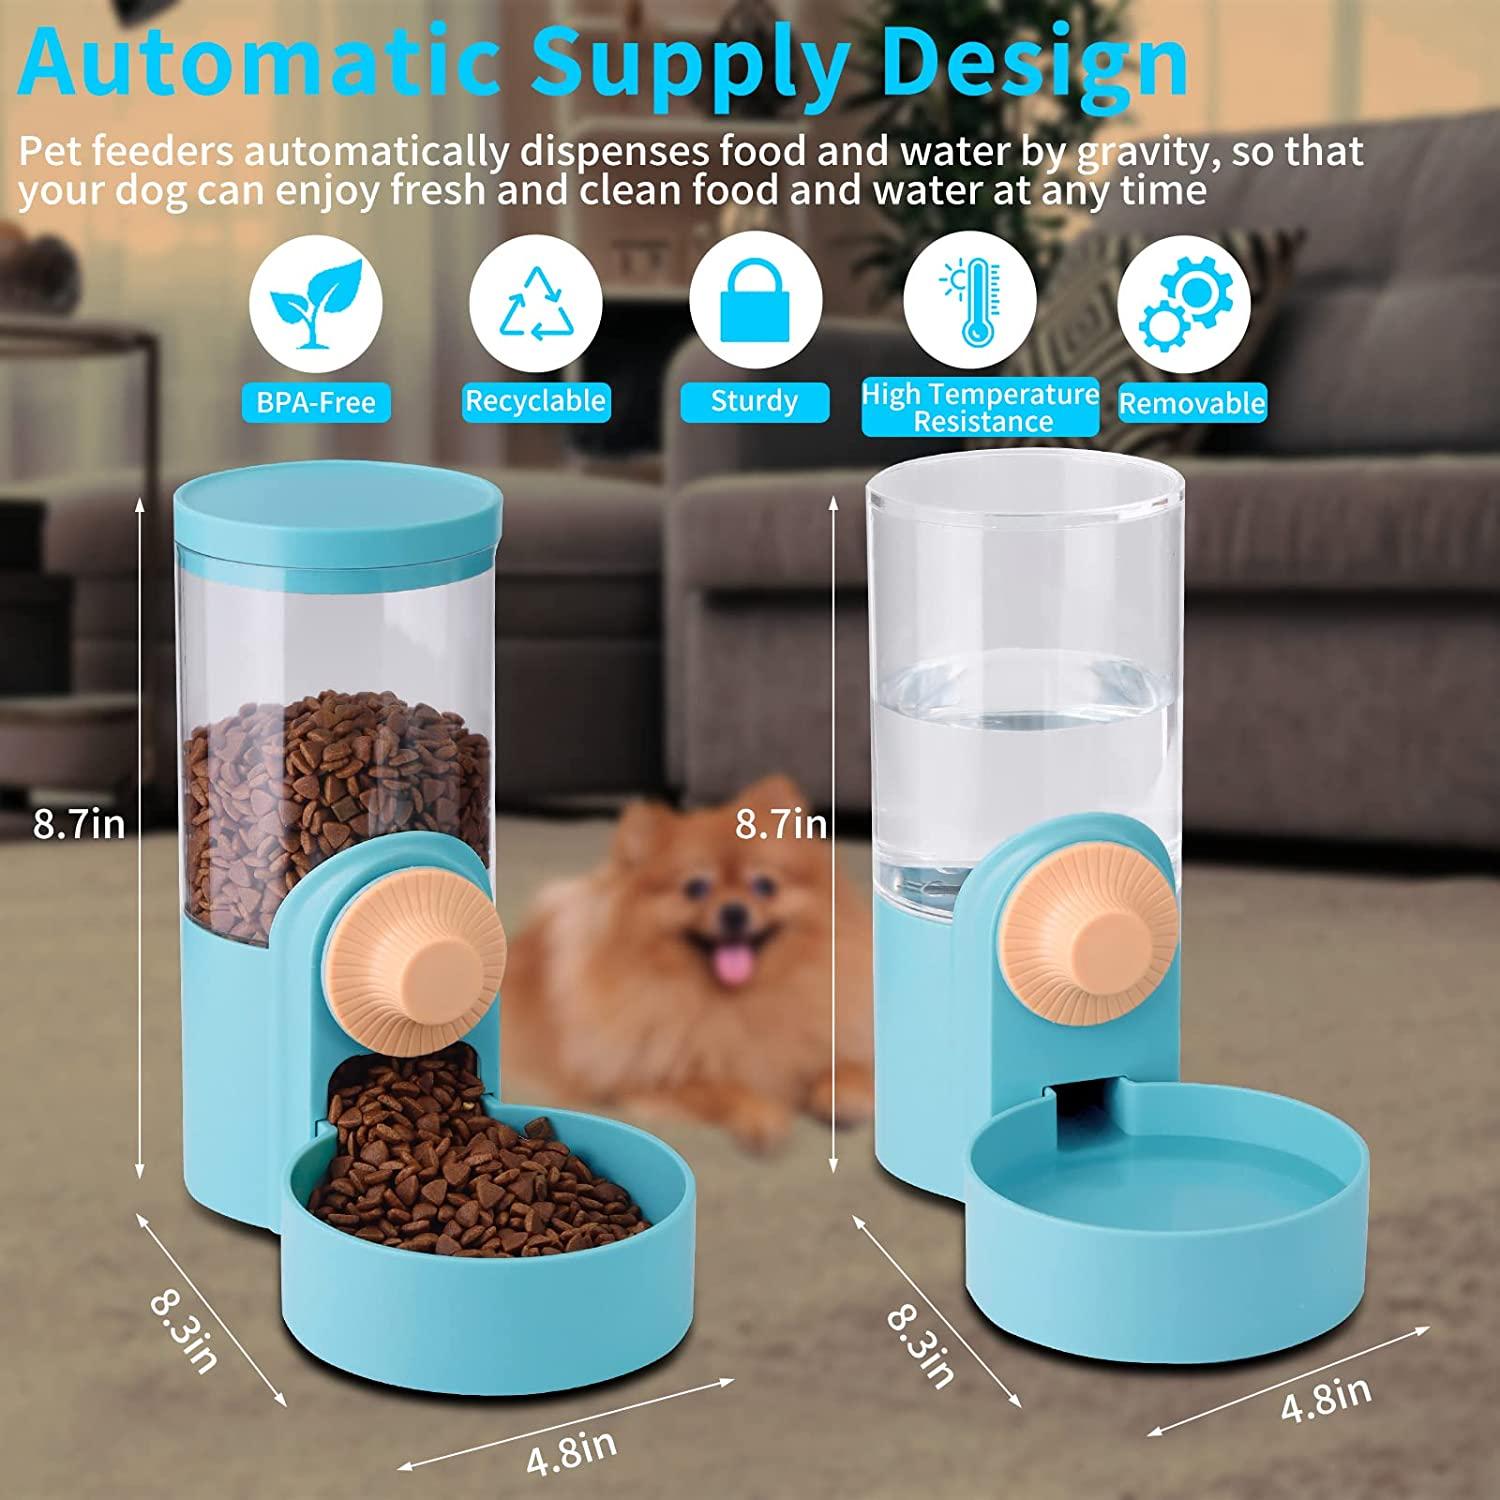 How to Make a Pet Automatic Cold Water Feeder - Unique Creations By Anita